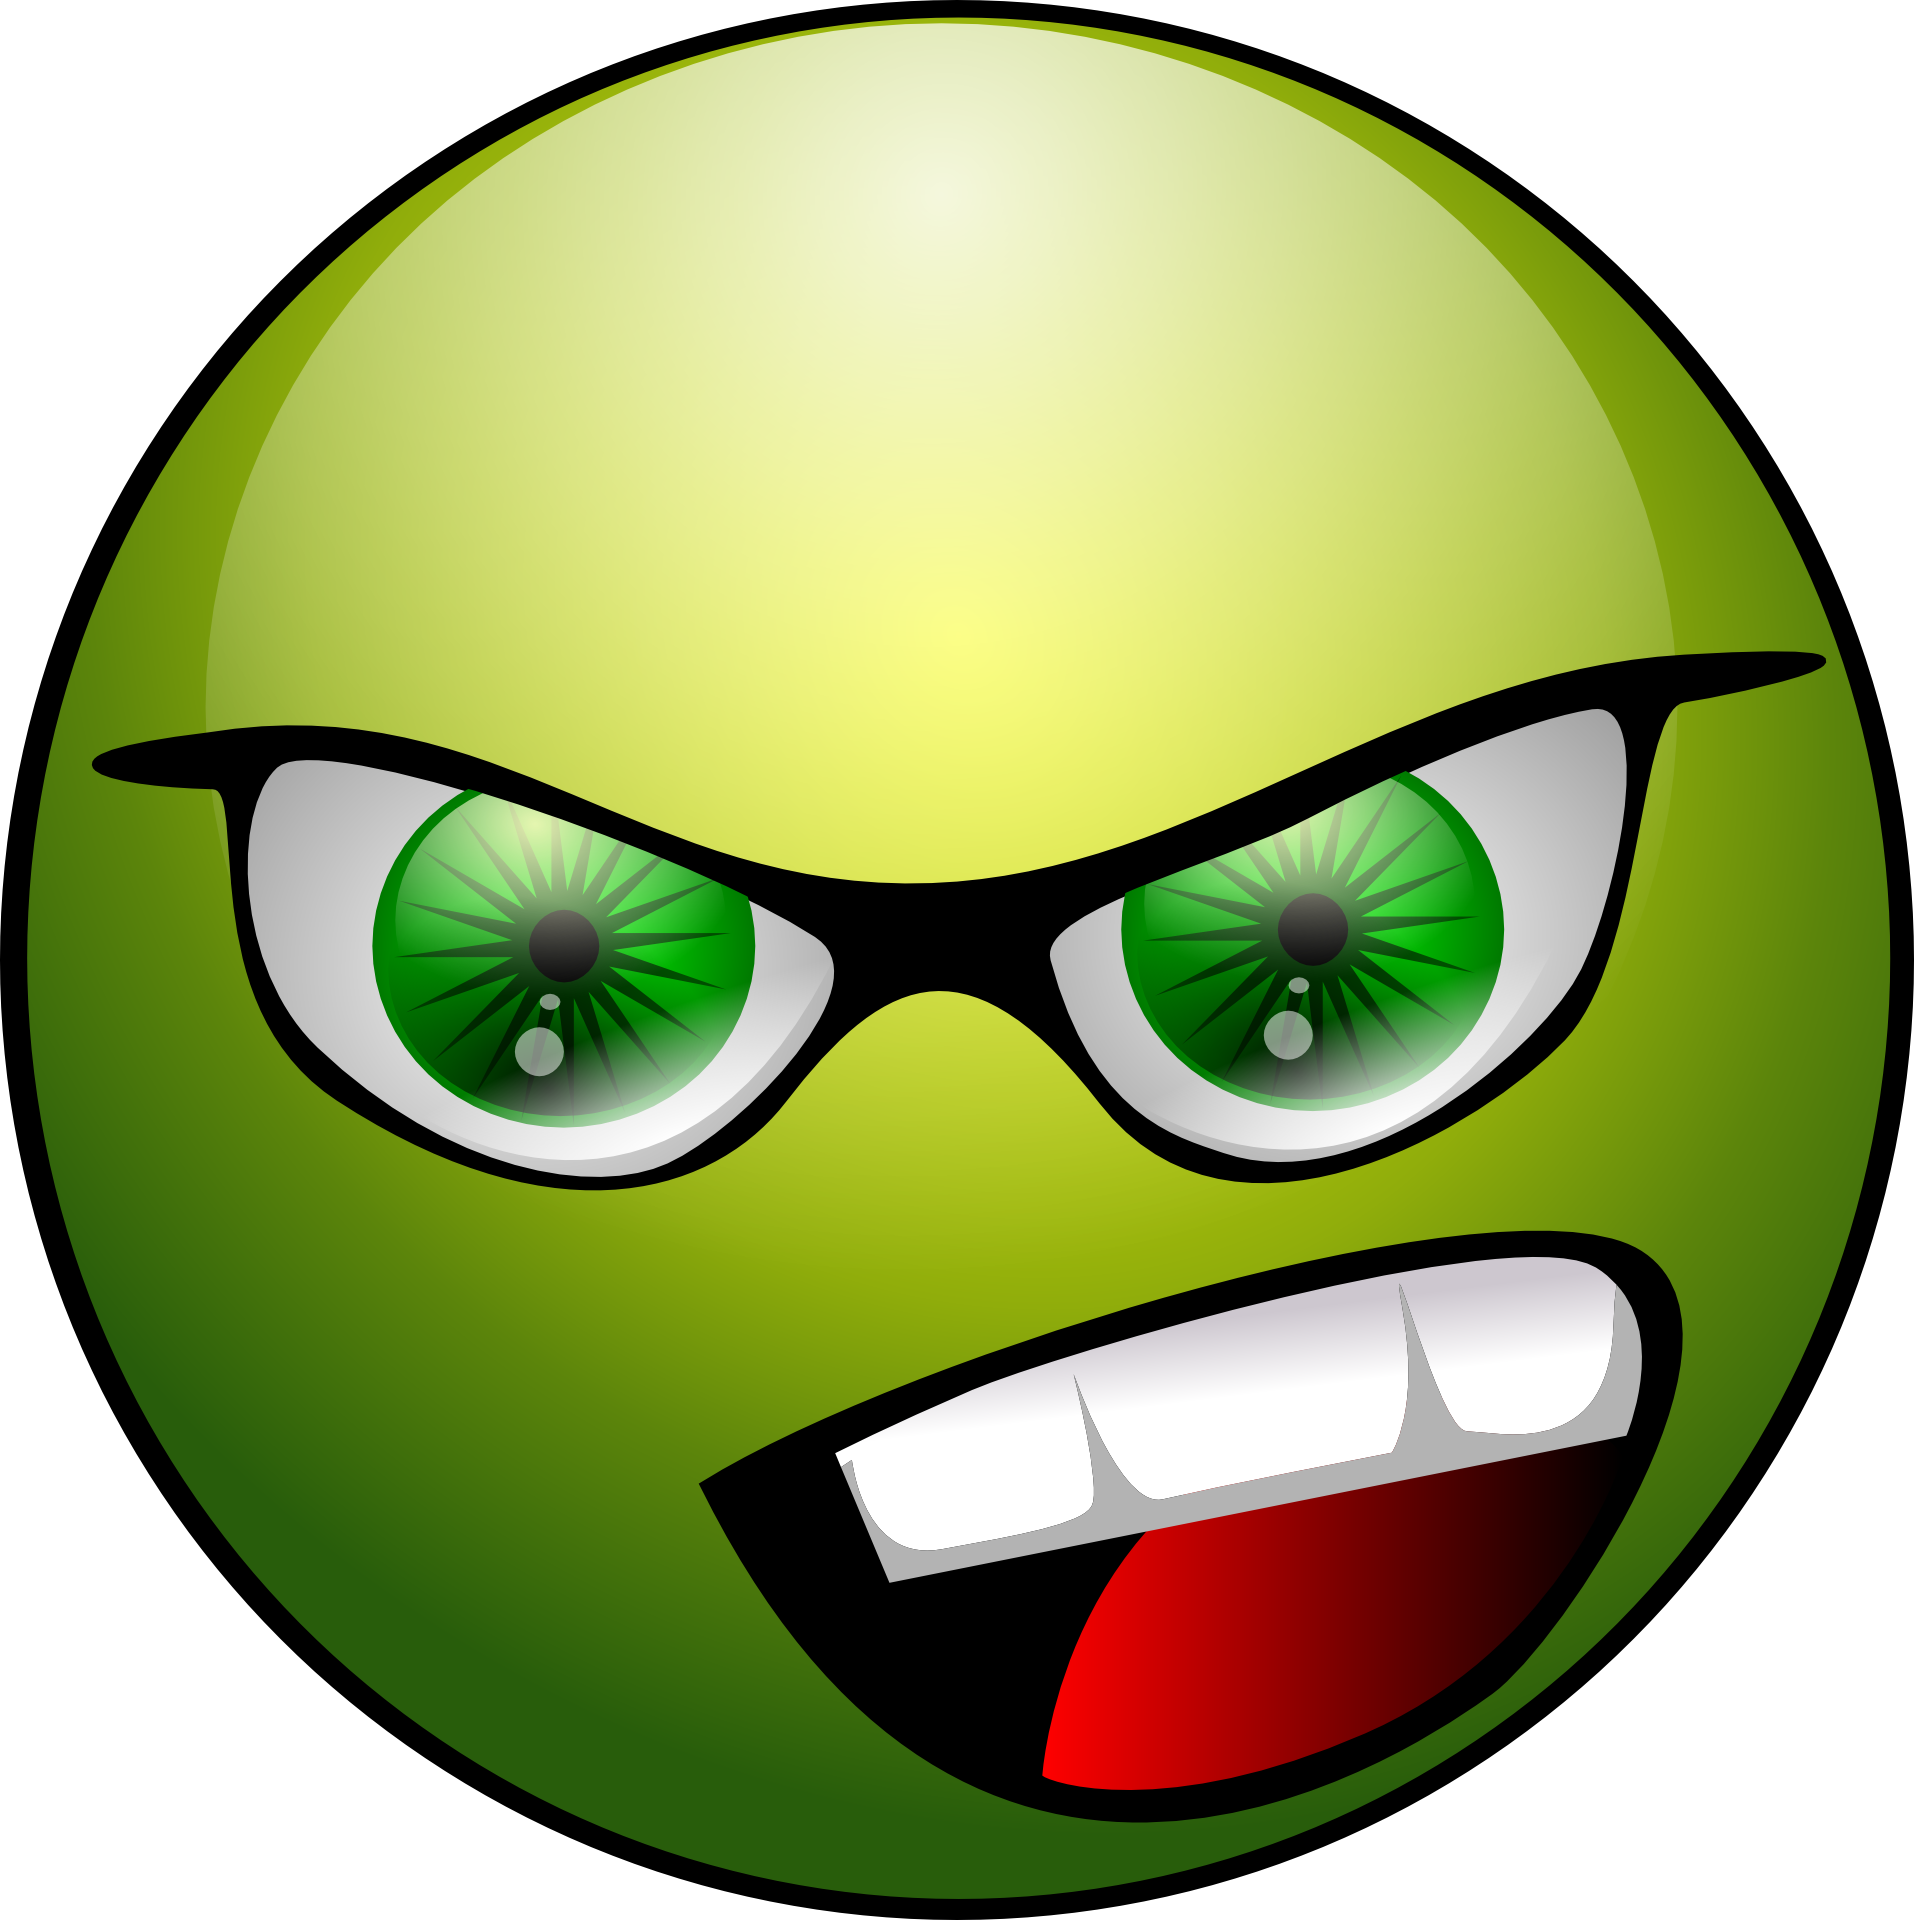 https://pixabay.com/en/angry-face-emoticon-animations-33059/